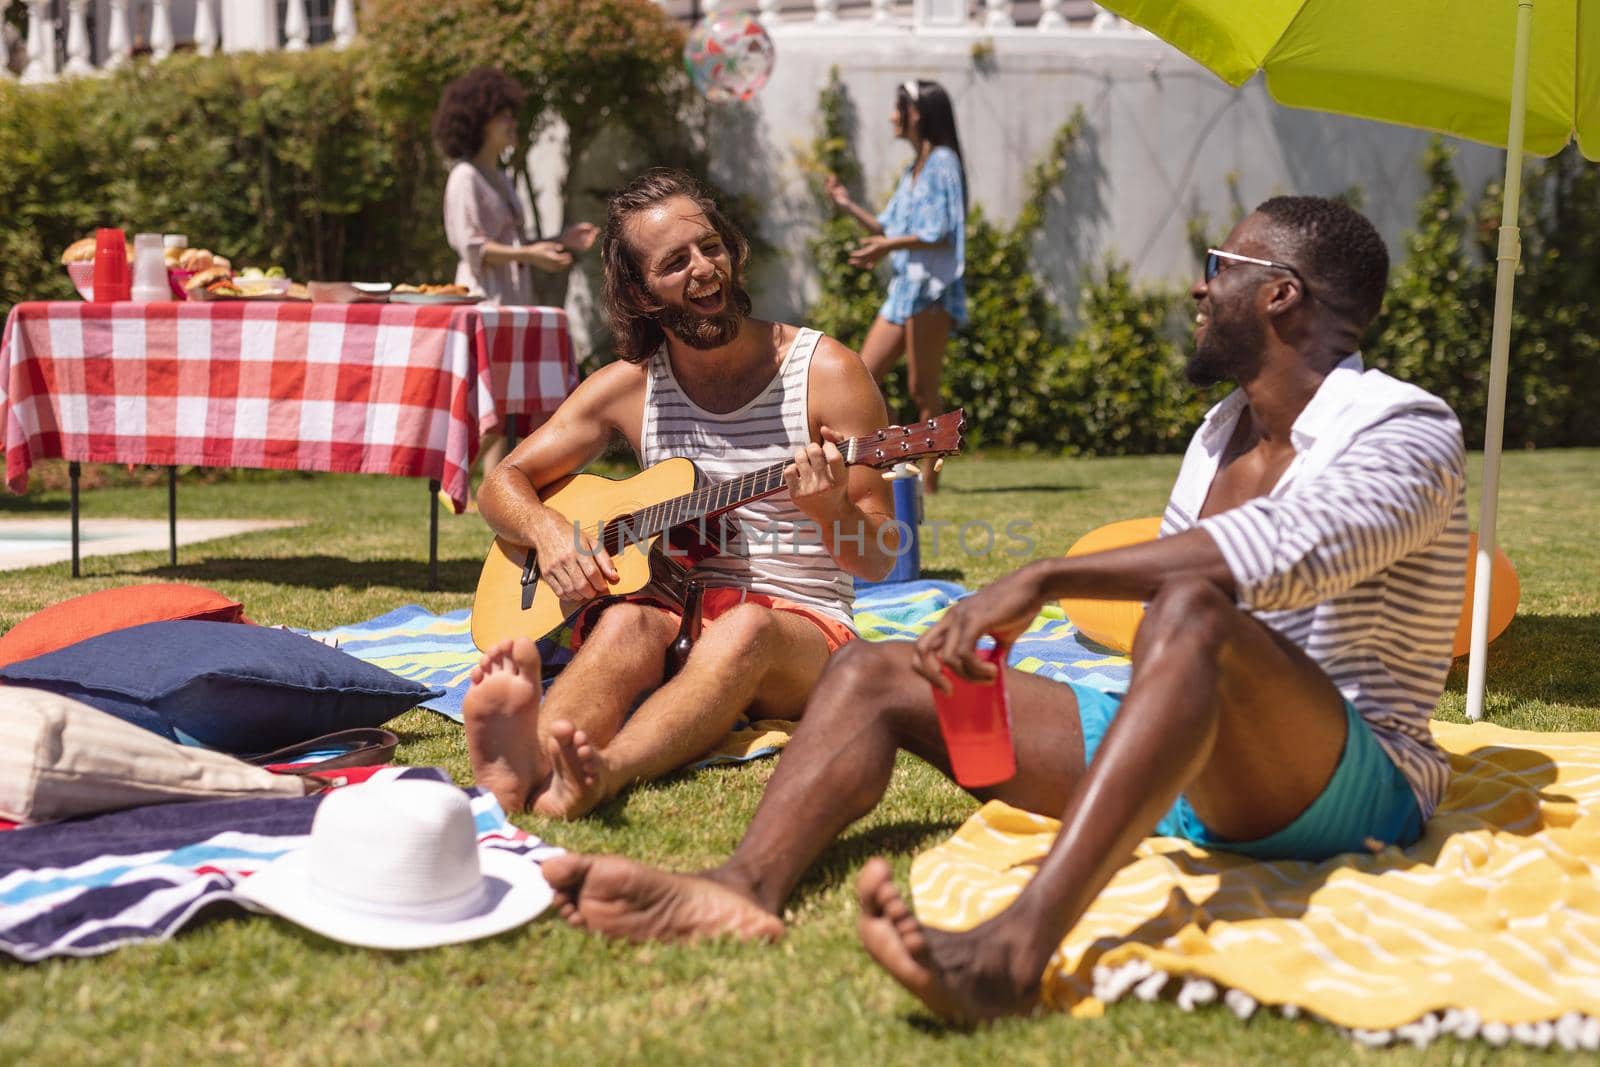 Two diverse male friends playing guitar and smiling at a pool party. Hanging out and relaxing outdoors in summer.